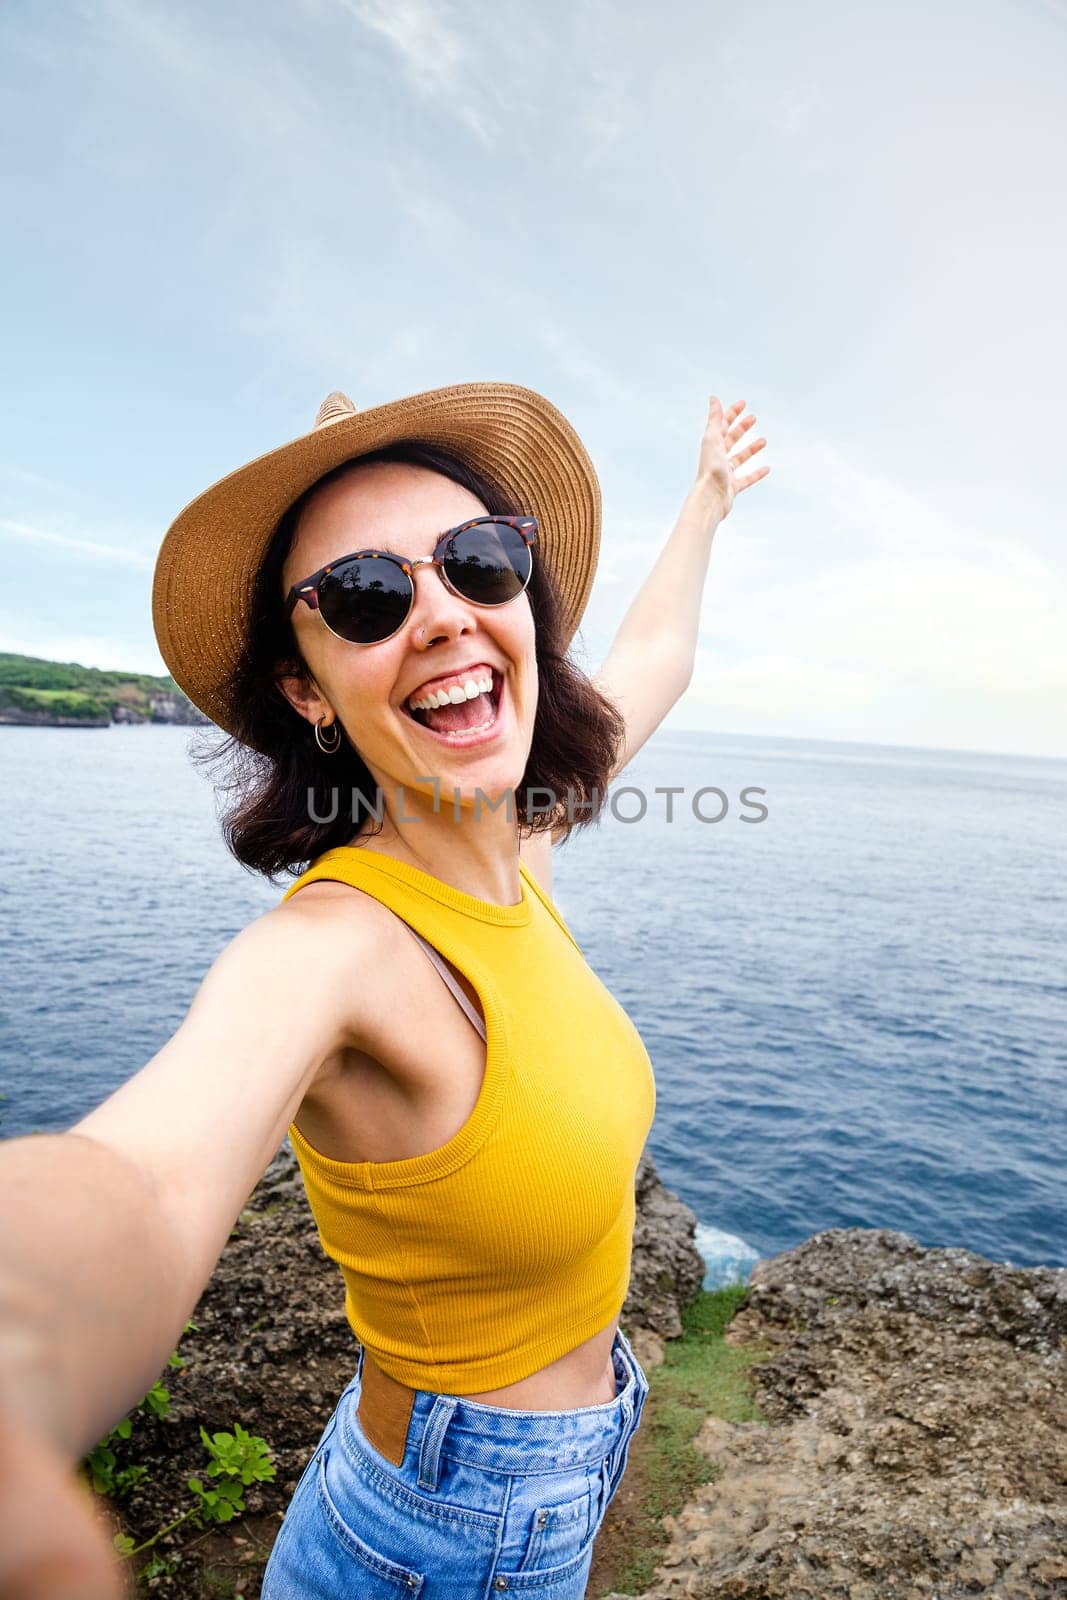 Joyful and smiling young woman traveler taking selfie with phone during summer vacation in seaside location. Vertical image. Travel, freedom and happiness concept.